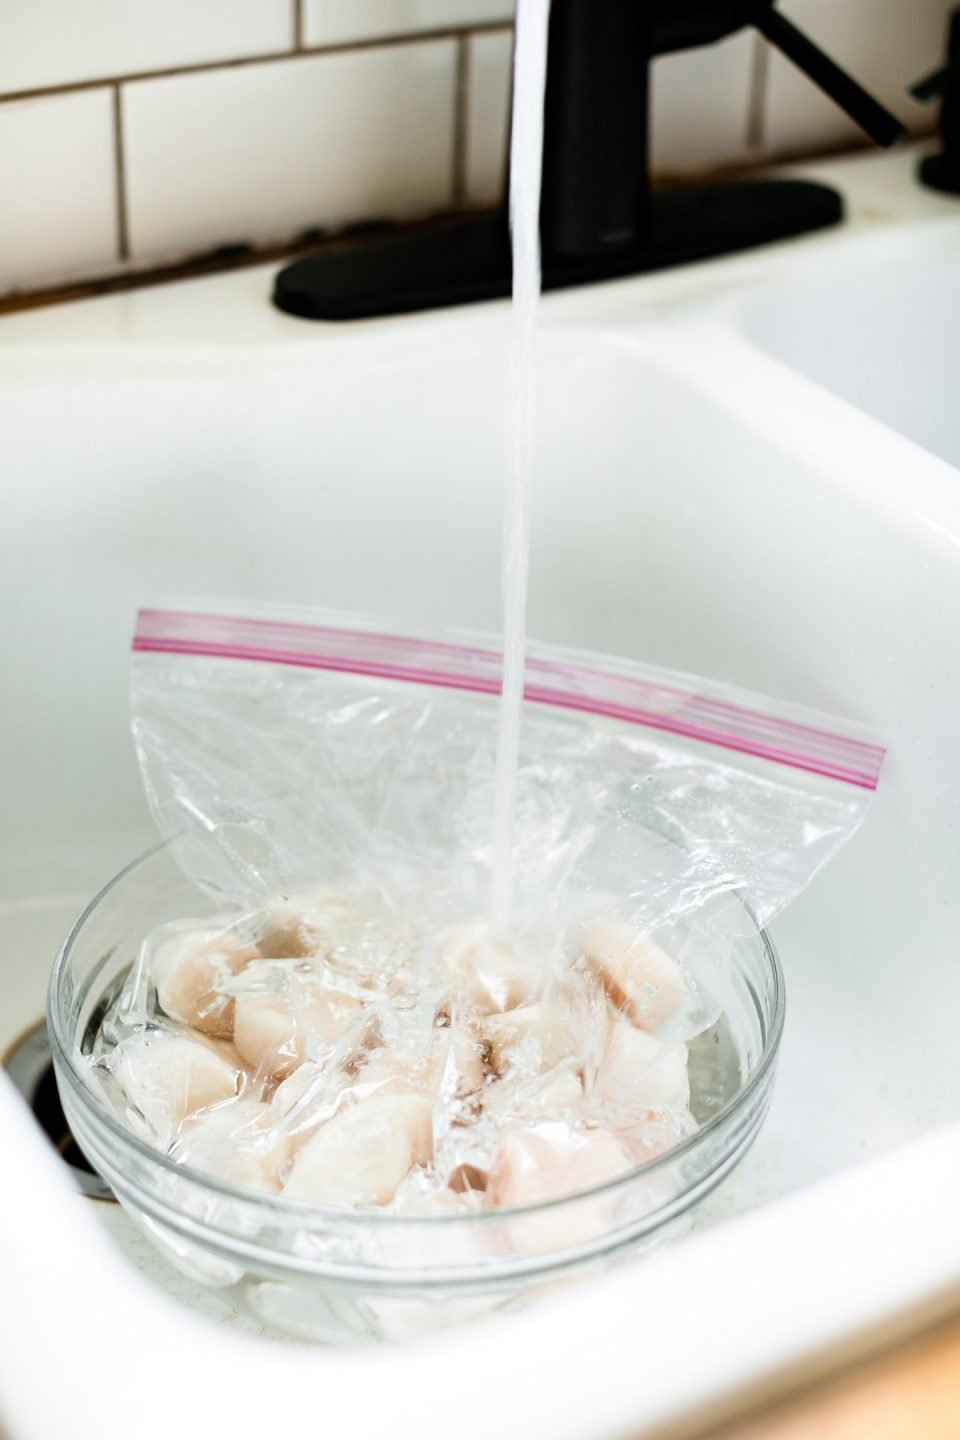 How to thaw frozen scallops – Frozen scallops in a zip-top bag in a glass mixing bowl in a farmhouse-style sink with cold water streaming over them.